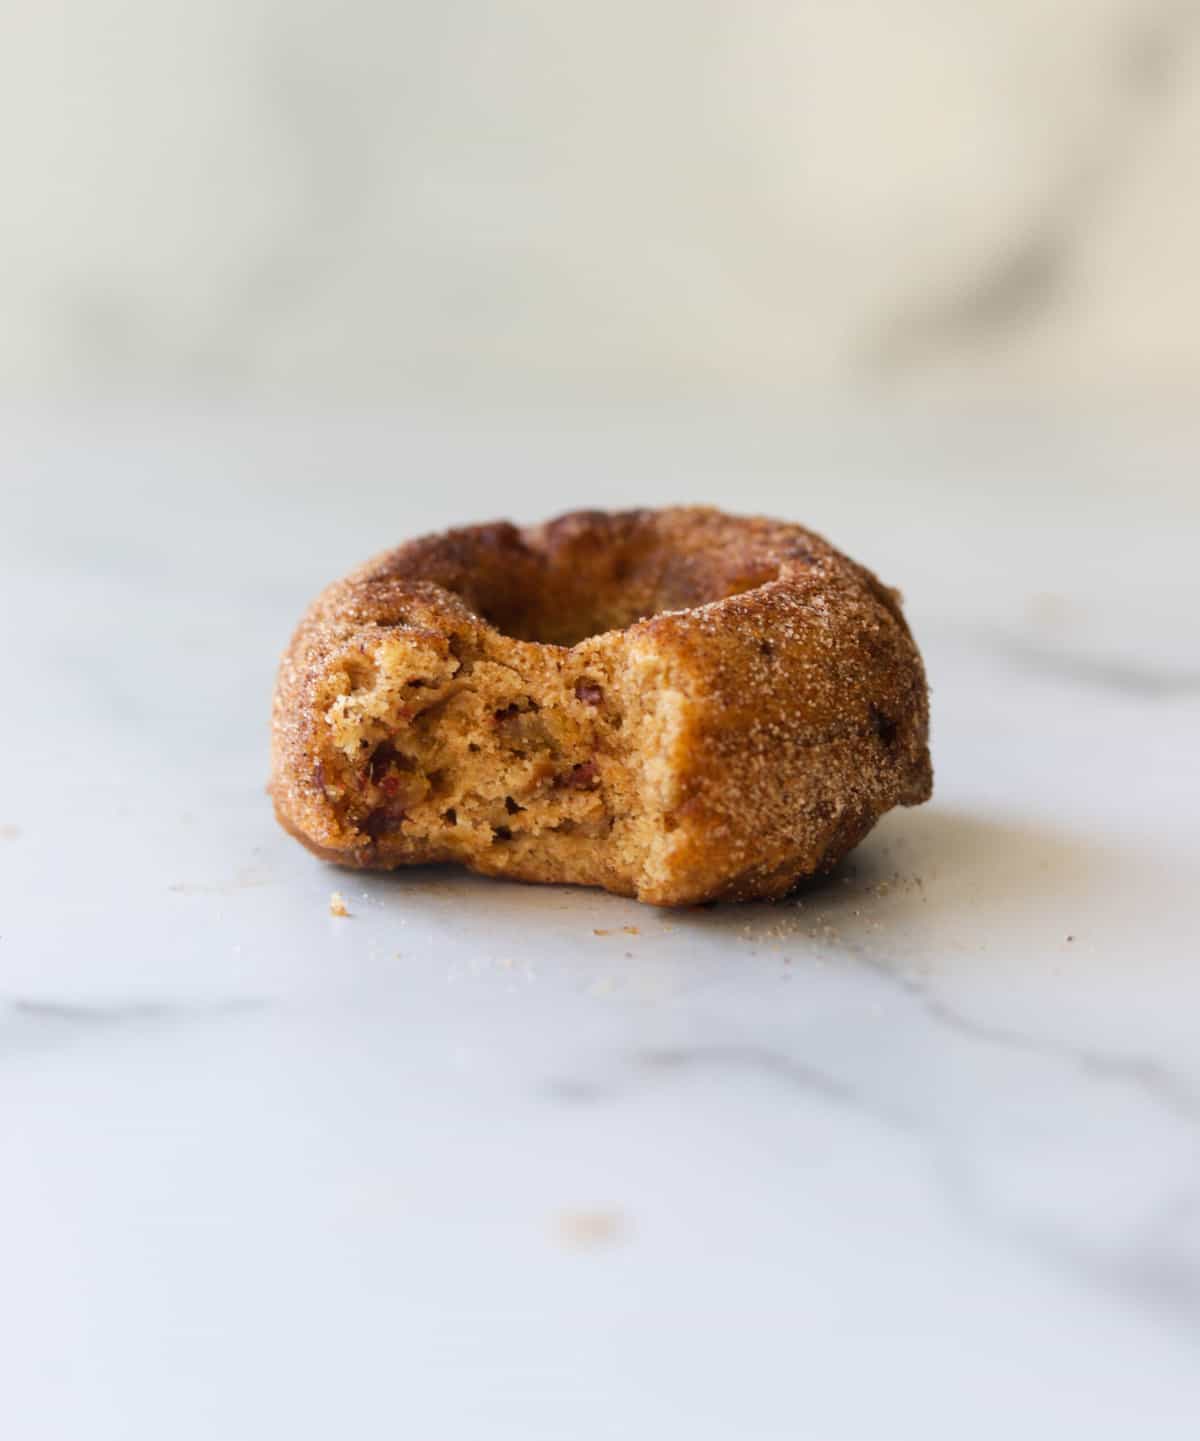 A side shot of a single apple date donut with a bite taken out of it.